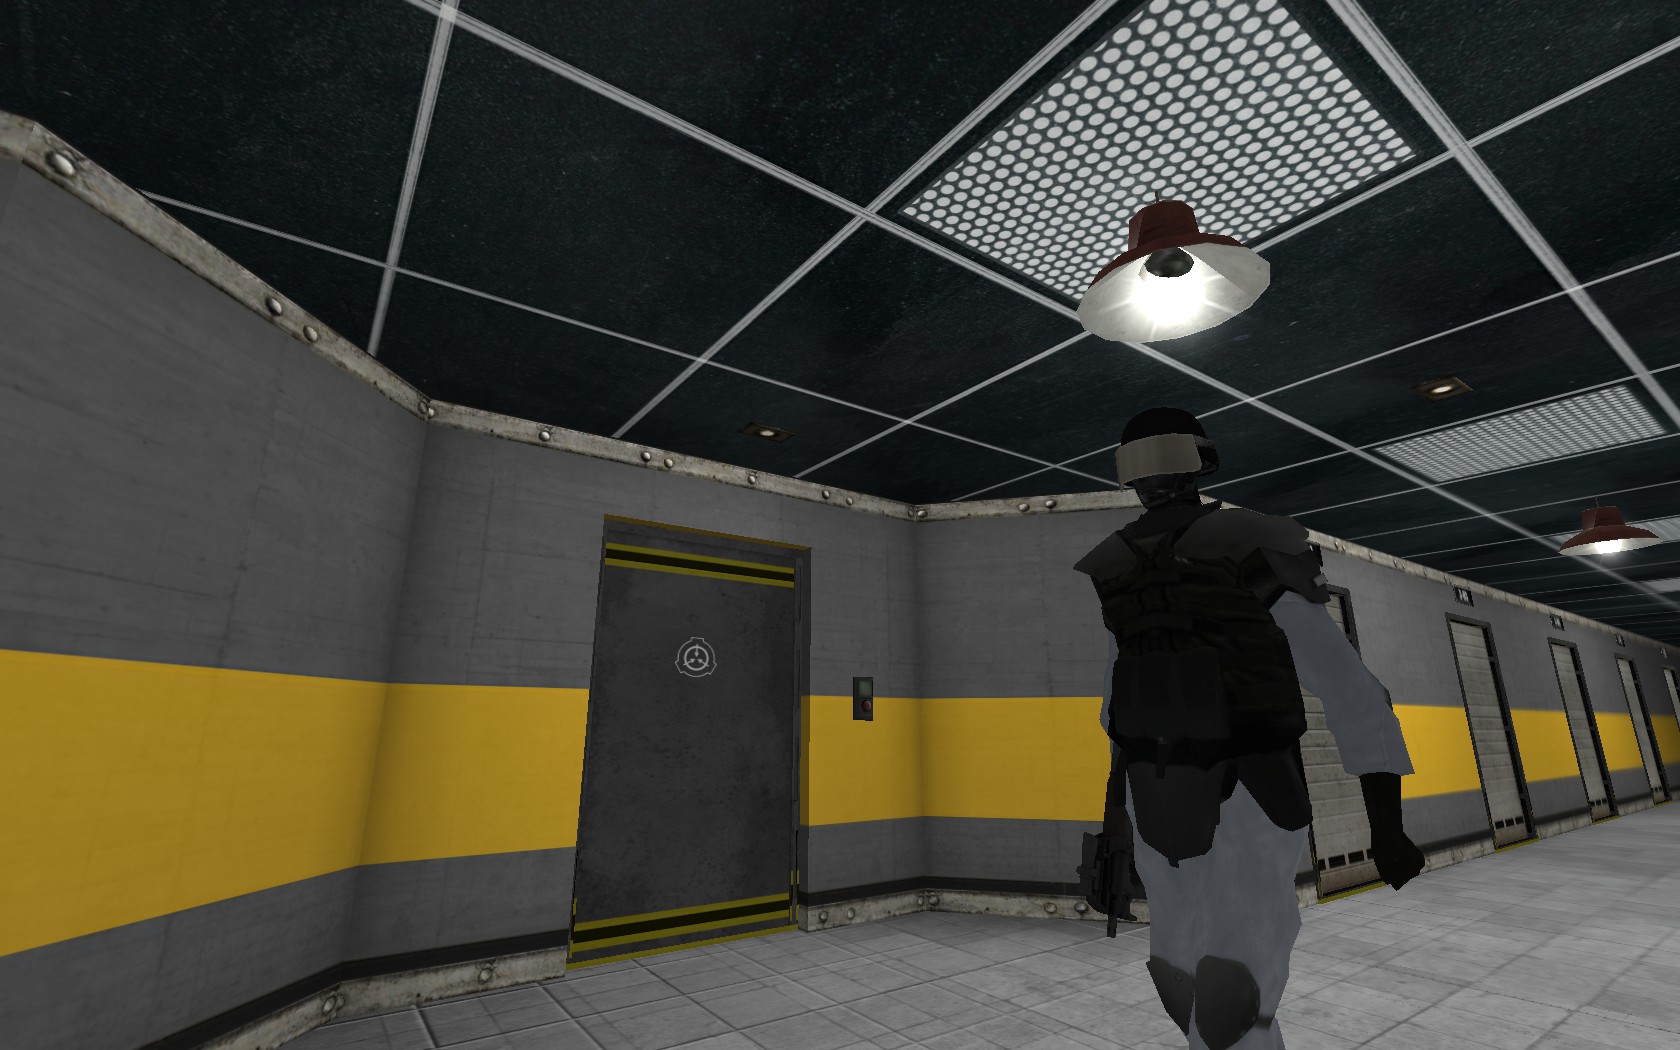 Image 4 - Eternal Nightmares Revival mod for SCP - Containment Breach  Multiplayer Mod - Mod DB